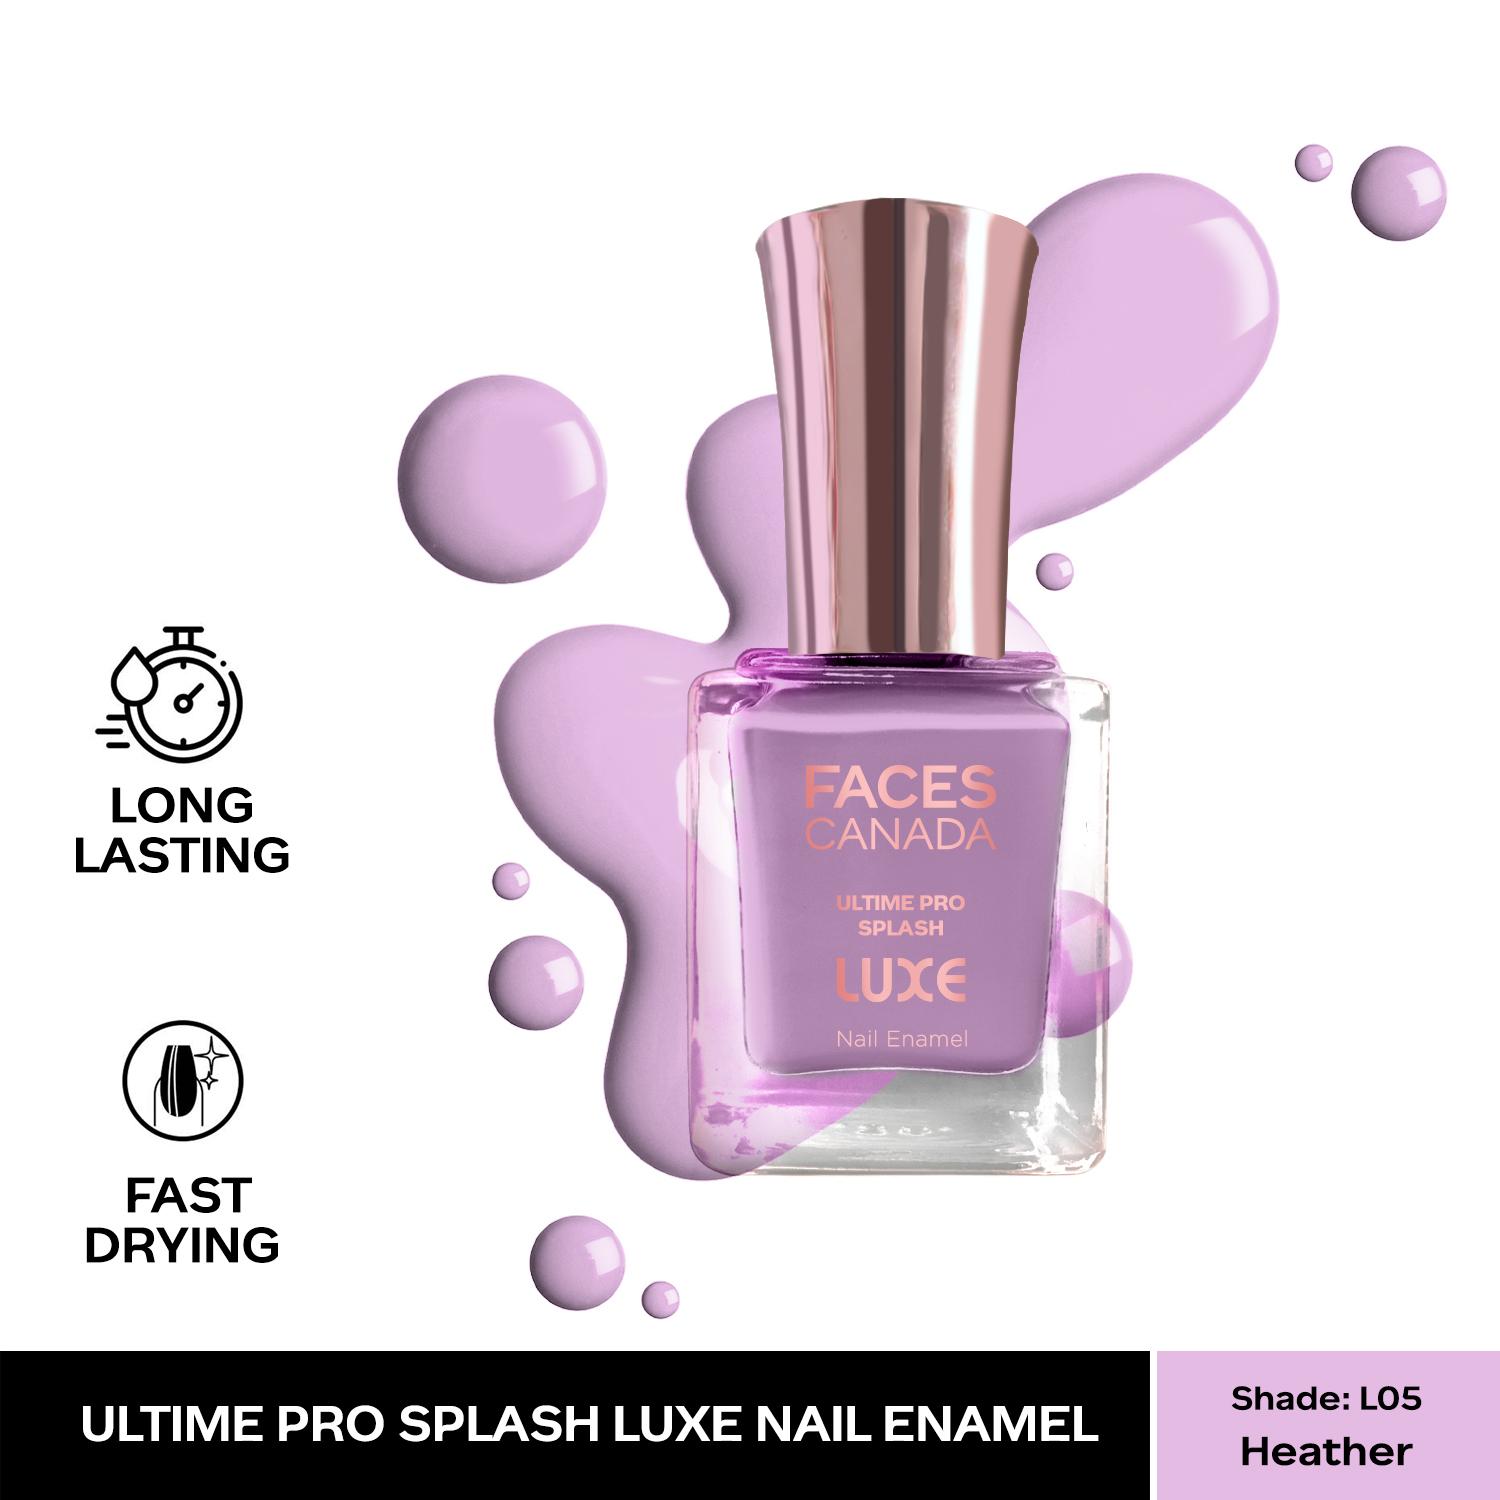 Faces Canada | Faces Canada Ultime Pro Splash Luxe Nail Enamel - Heather (L05), Glossy Finish (12 ml)